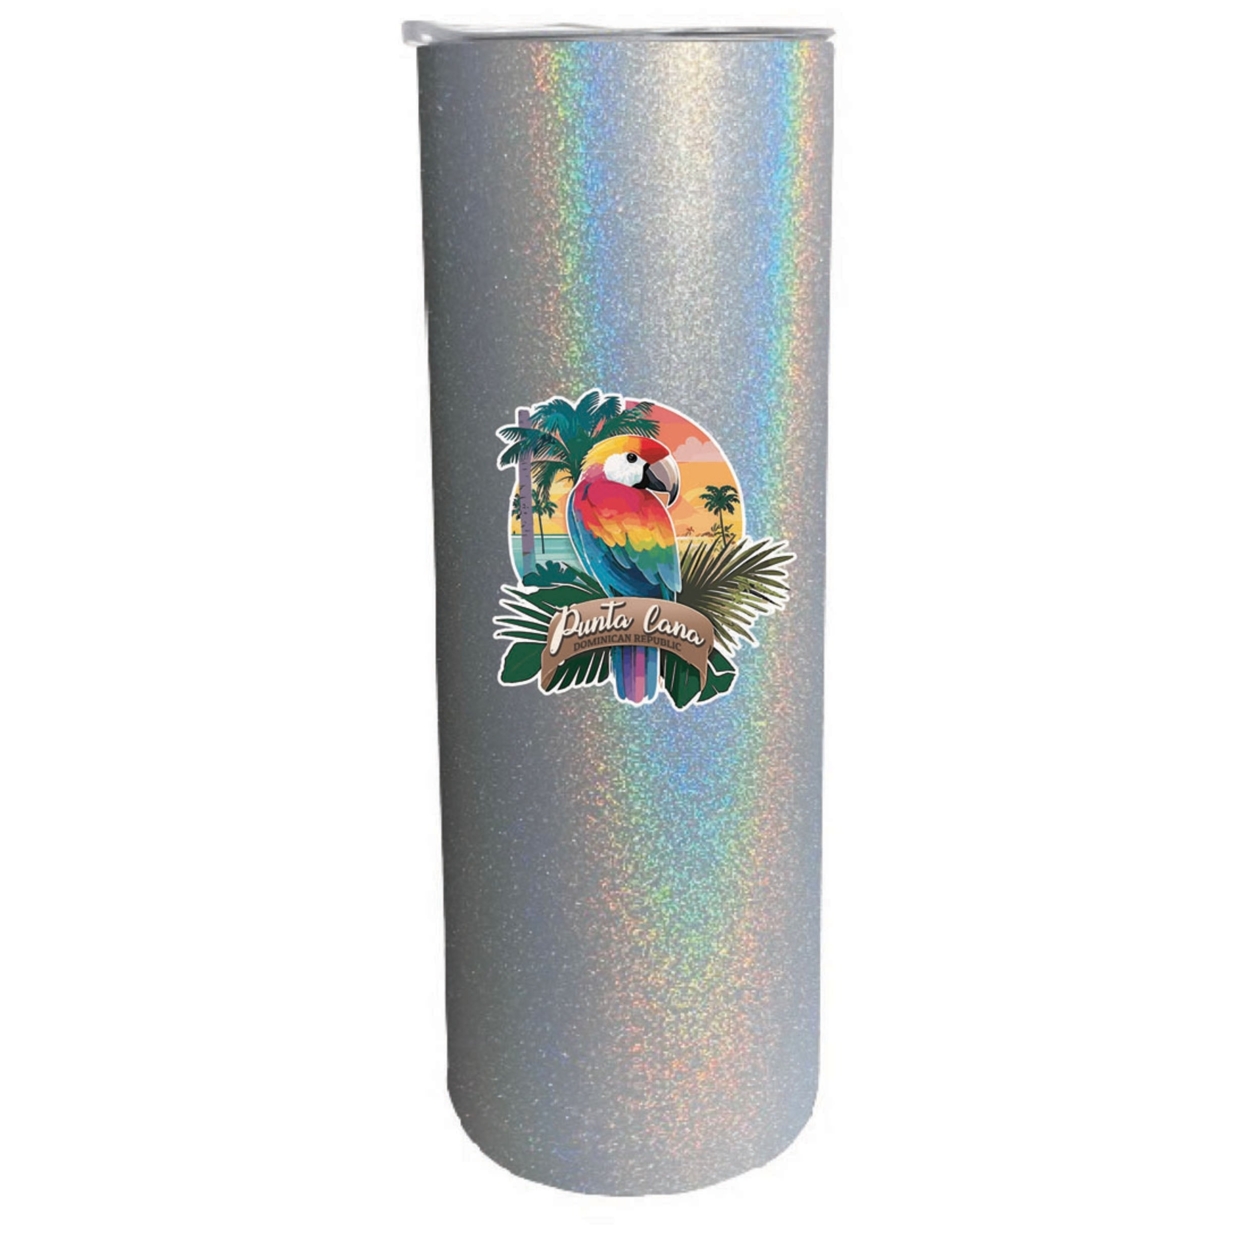 Punta Cana Dominican Republic Souvenir 20 Oz Insulated Stainless Steel Skinny Tumbler - Rainbow Glitter Black, PARROT